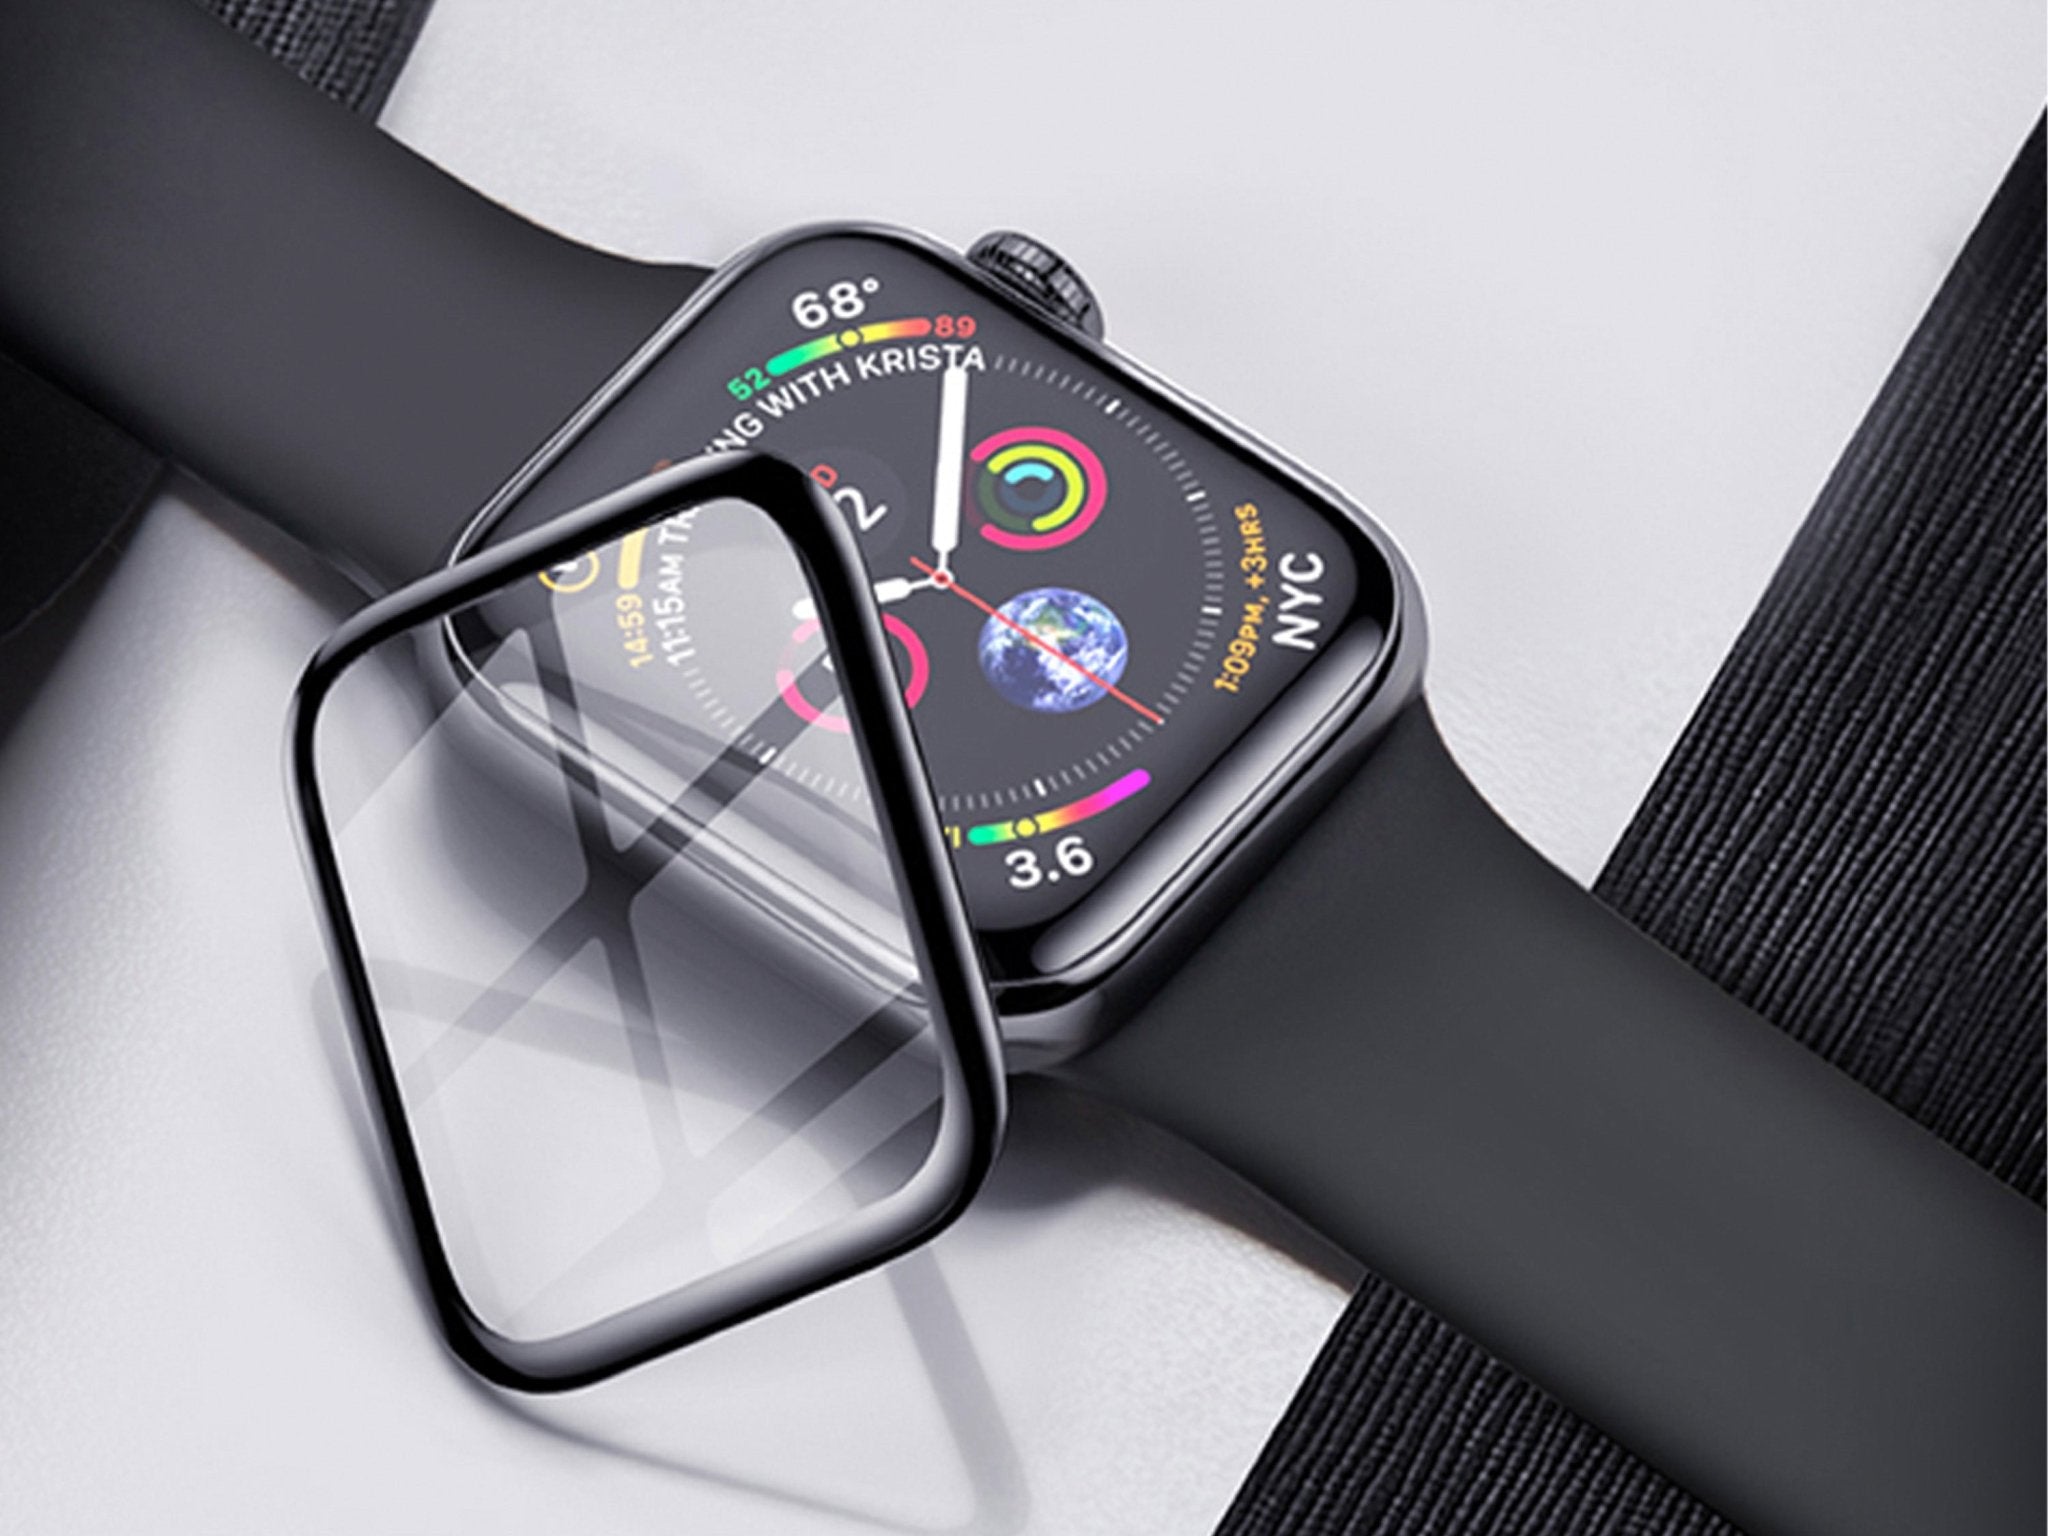 Screen Protector for Apple Watch Series 7 6 5 4 3 2 1 & SE, Curved Edge Anti-Scratch Bubble-Free 3D Ultra Shatterproof Flexible Protector Film    Accessories Gifts UK